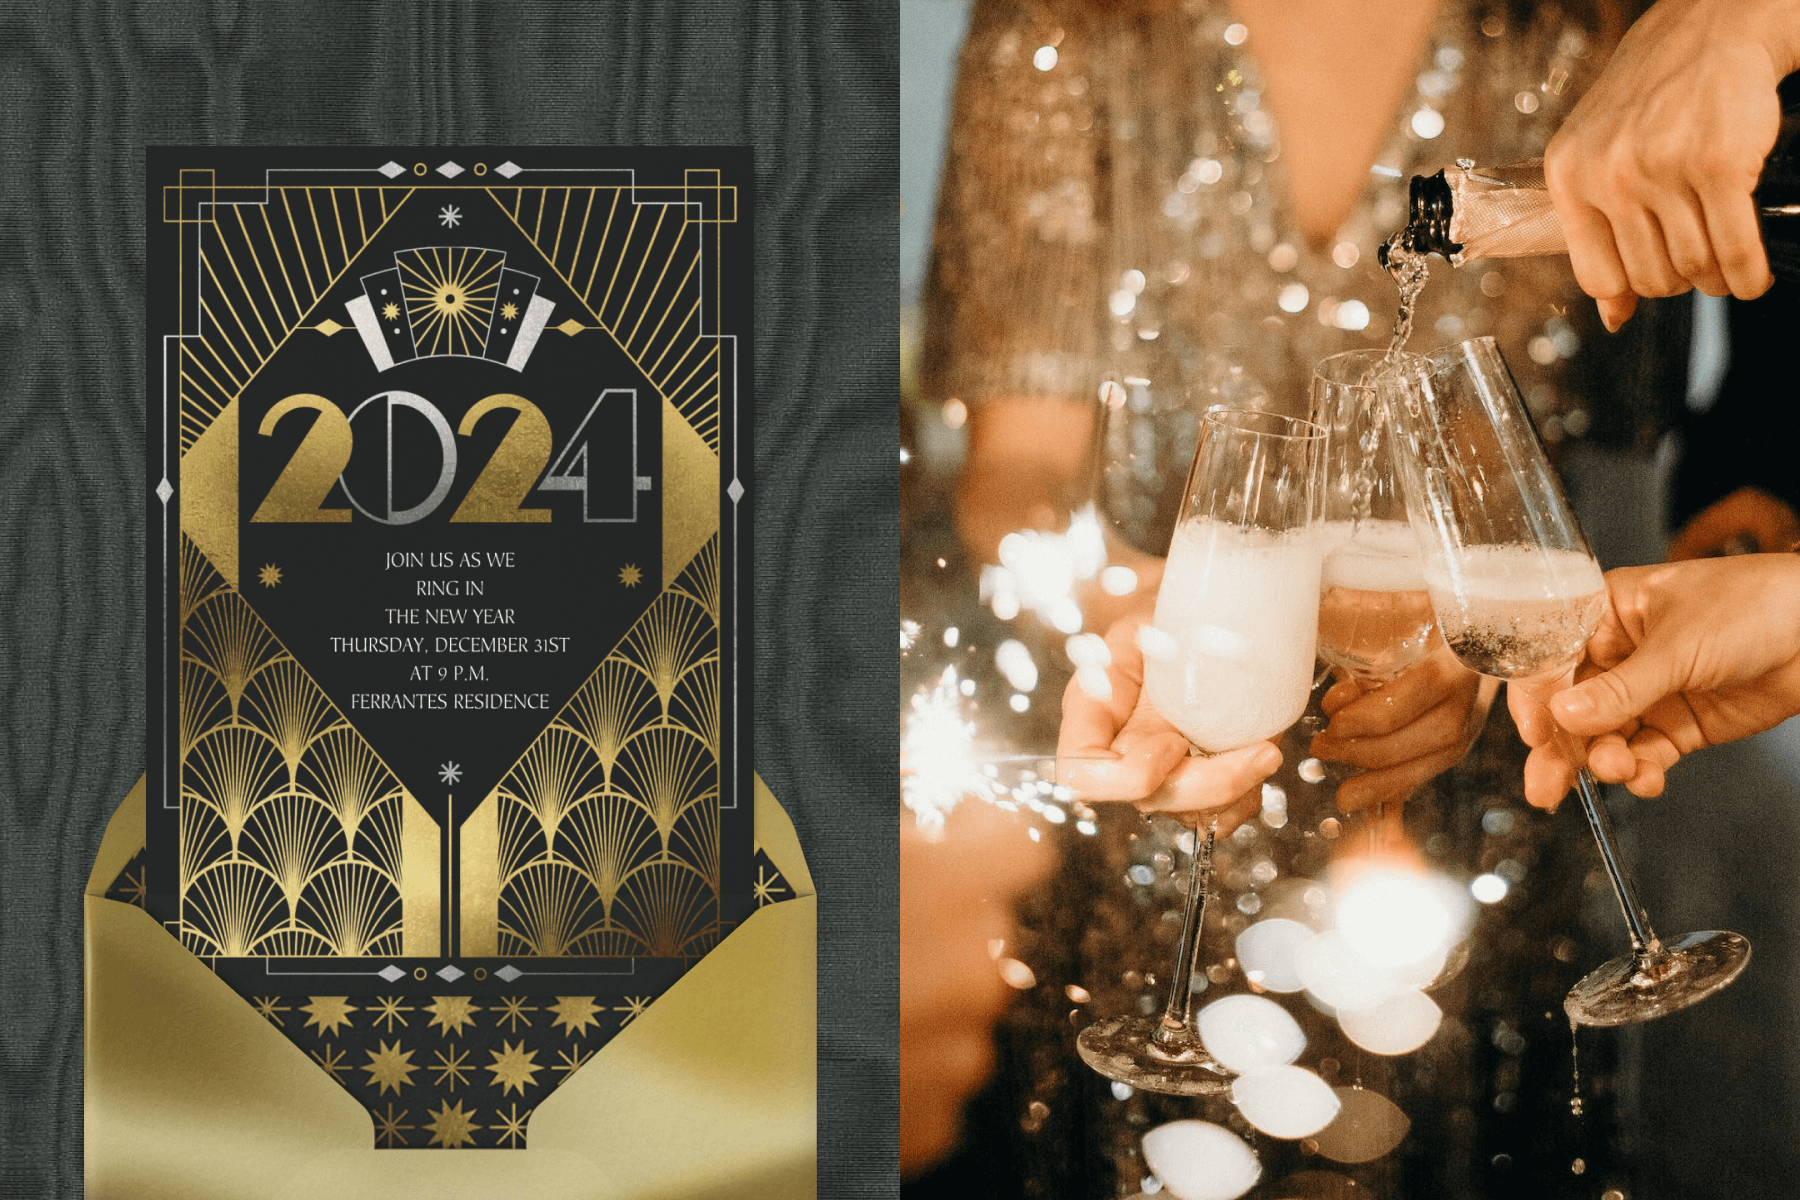 Left: An Art Deco-style patterned card in gold, black, and silver with “2024” in the center and a gold envelope. Right: People hold out three Champagne flutes for refills from a bottle.